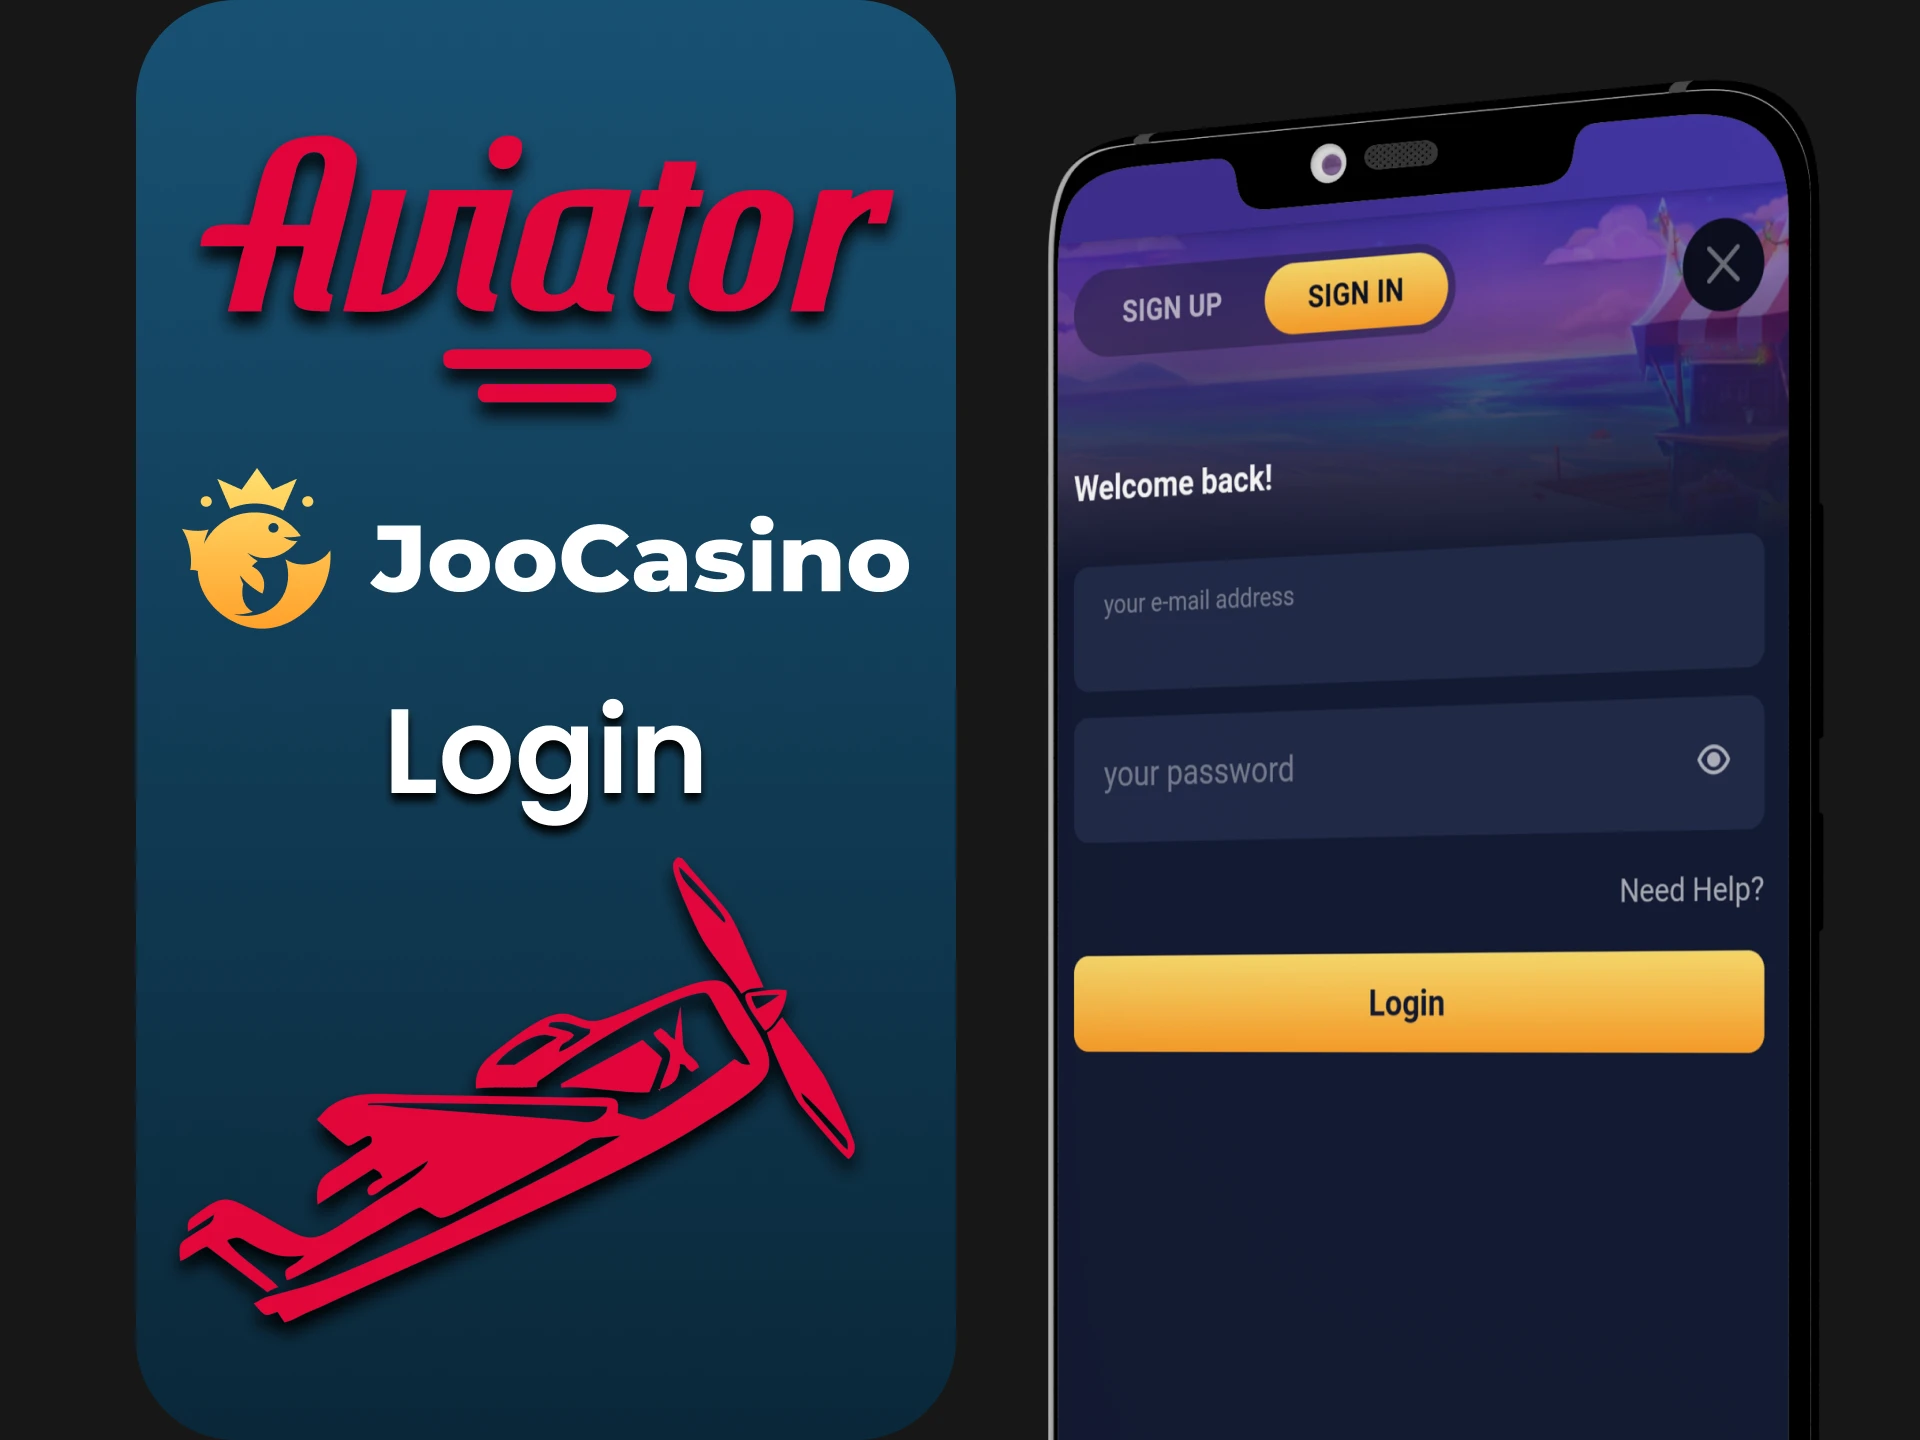 By logging into your personal account on the Joo Casino application, you can play Aviator.